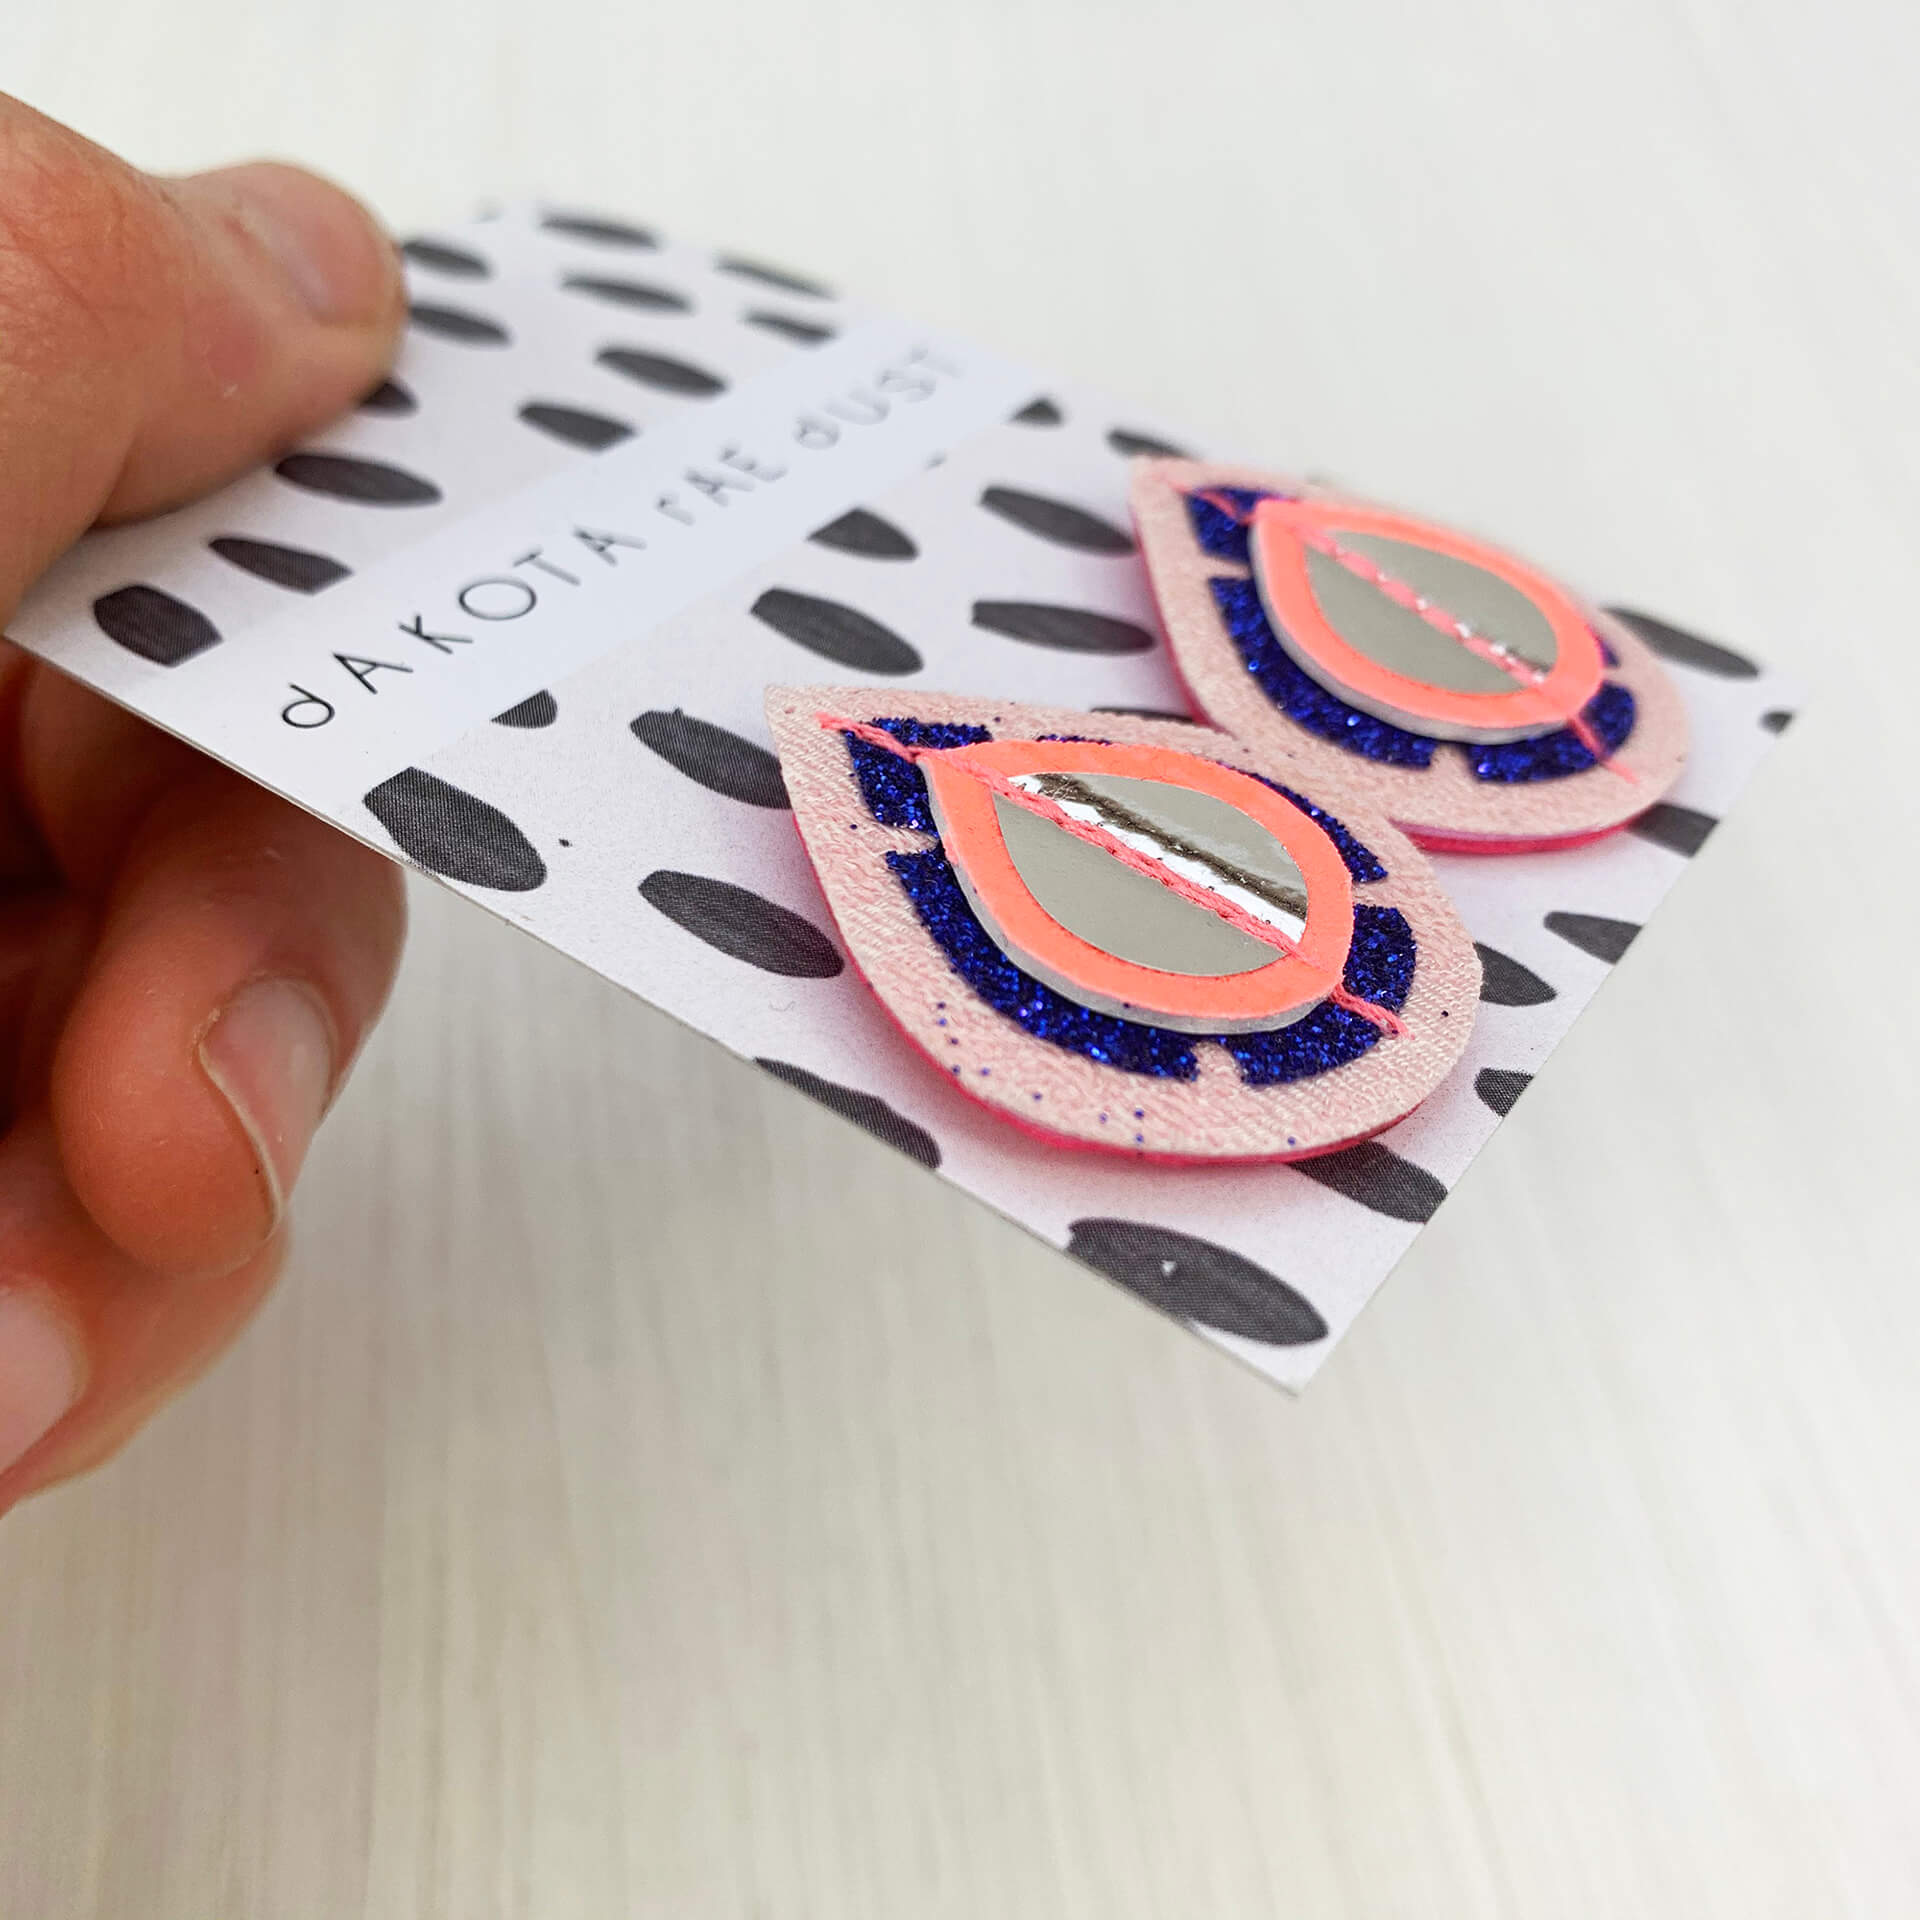 A pair of recycled pink kimono fabric and glittery blue vinyl teardrop shaped studs mounted on a dakota rae dust branded card are held between a just visible thumb and forefinger.